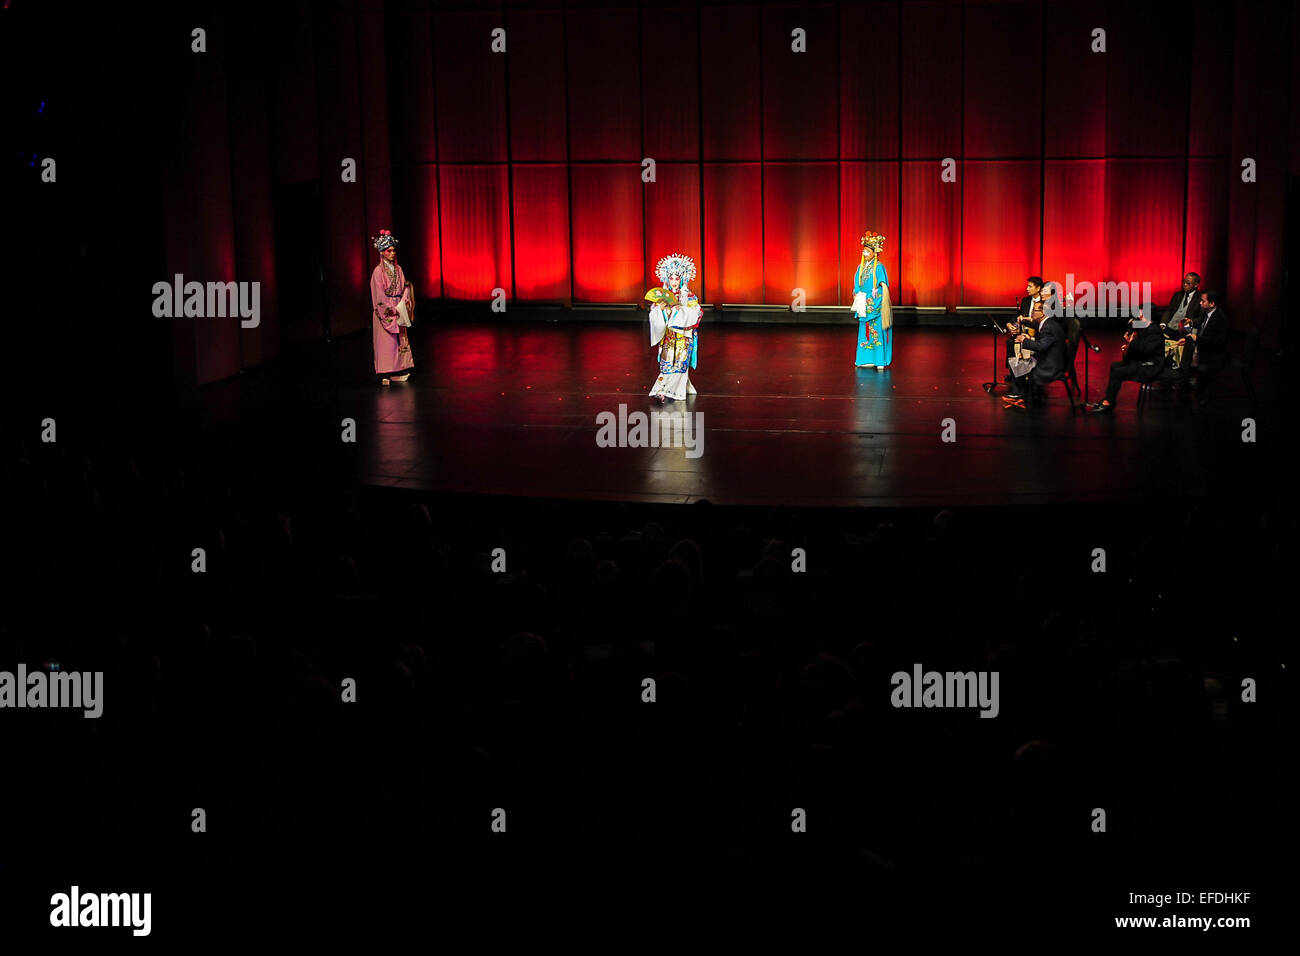 Los Angeles, USA. 1st Feb, 2015. Beijing opera artist of China Sun Ping (2nd L) performs an excerpt from 'The Drunken Beauty', during an Chinese Lunar New Year Celebration in Wallis Annenberg Center for the Performing Arts in Los Angeles, the United States, Feb. 1, 2015. © Zhang Chaoqun/Xinhua/Alamy Live News Stock Photo